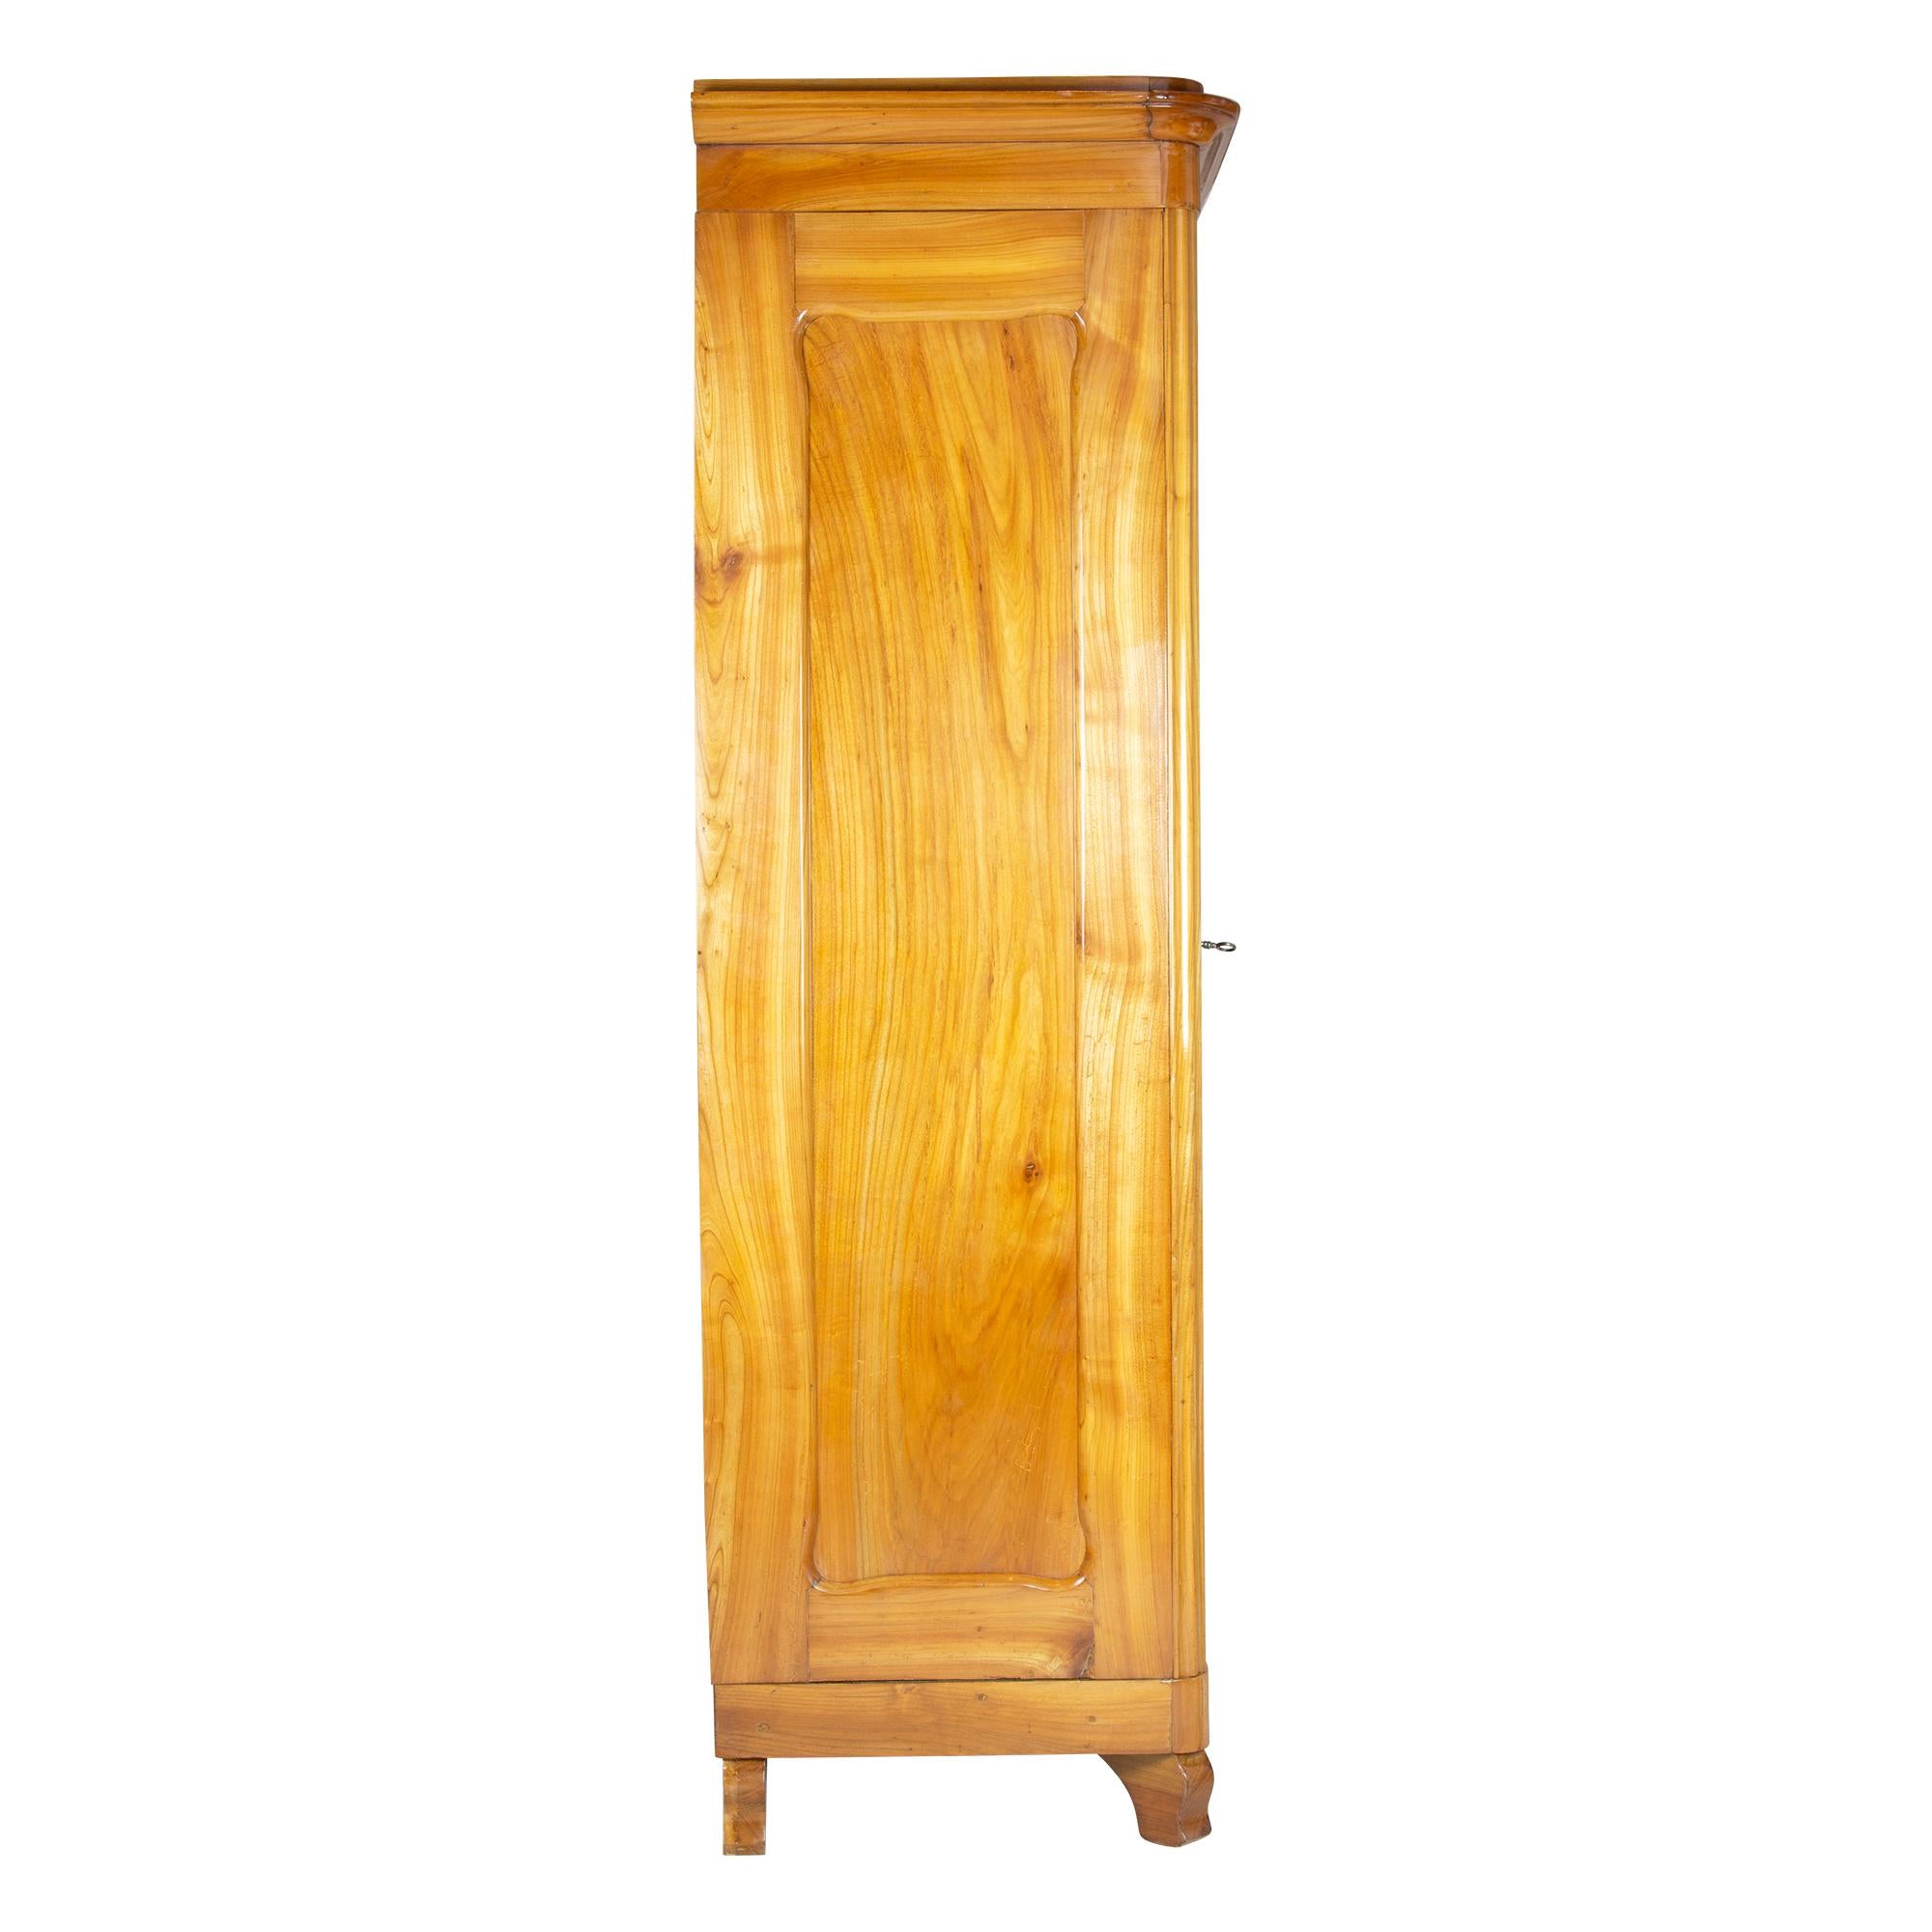 Beautiful wardrobe from the time of the Biedermeier circa 1850. Made of solid cherrywood. The wardrobe was lovingly restored by us. The wardrobe can be dismantled and shipped dismantled. The backside, bottom and top are made of spruce wood as usual.